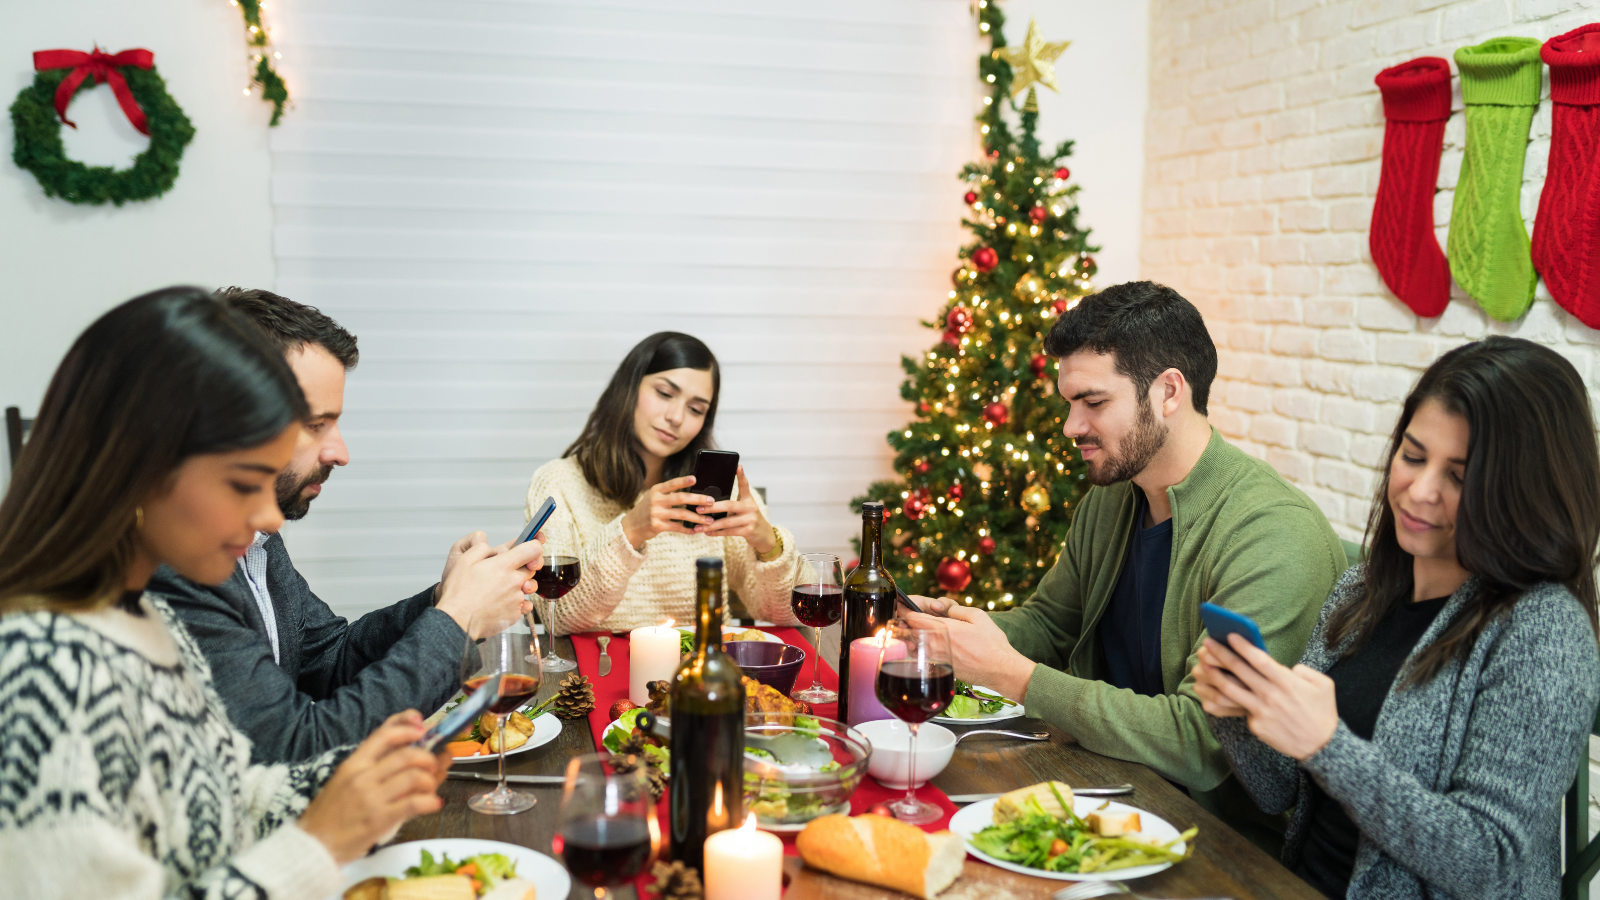 Distracted friends using smartphones while having meal at dining table during Christmas celebrations at home